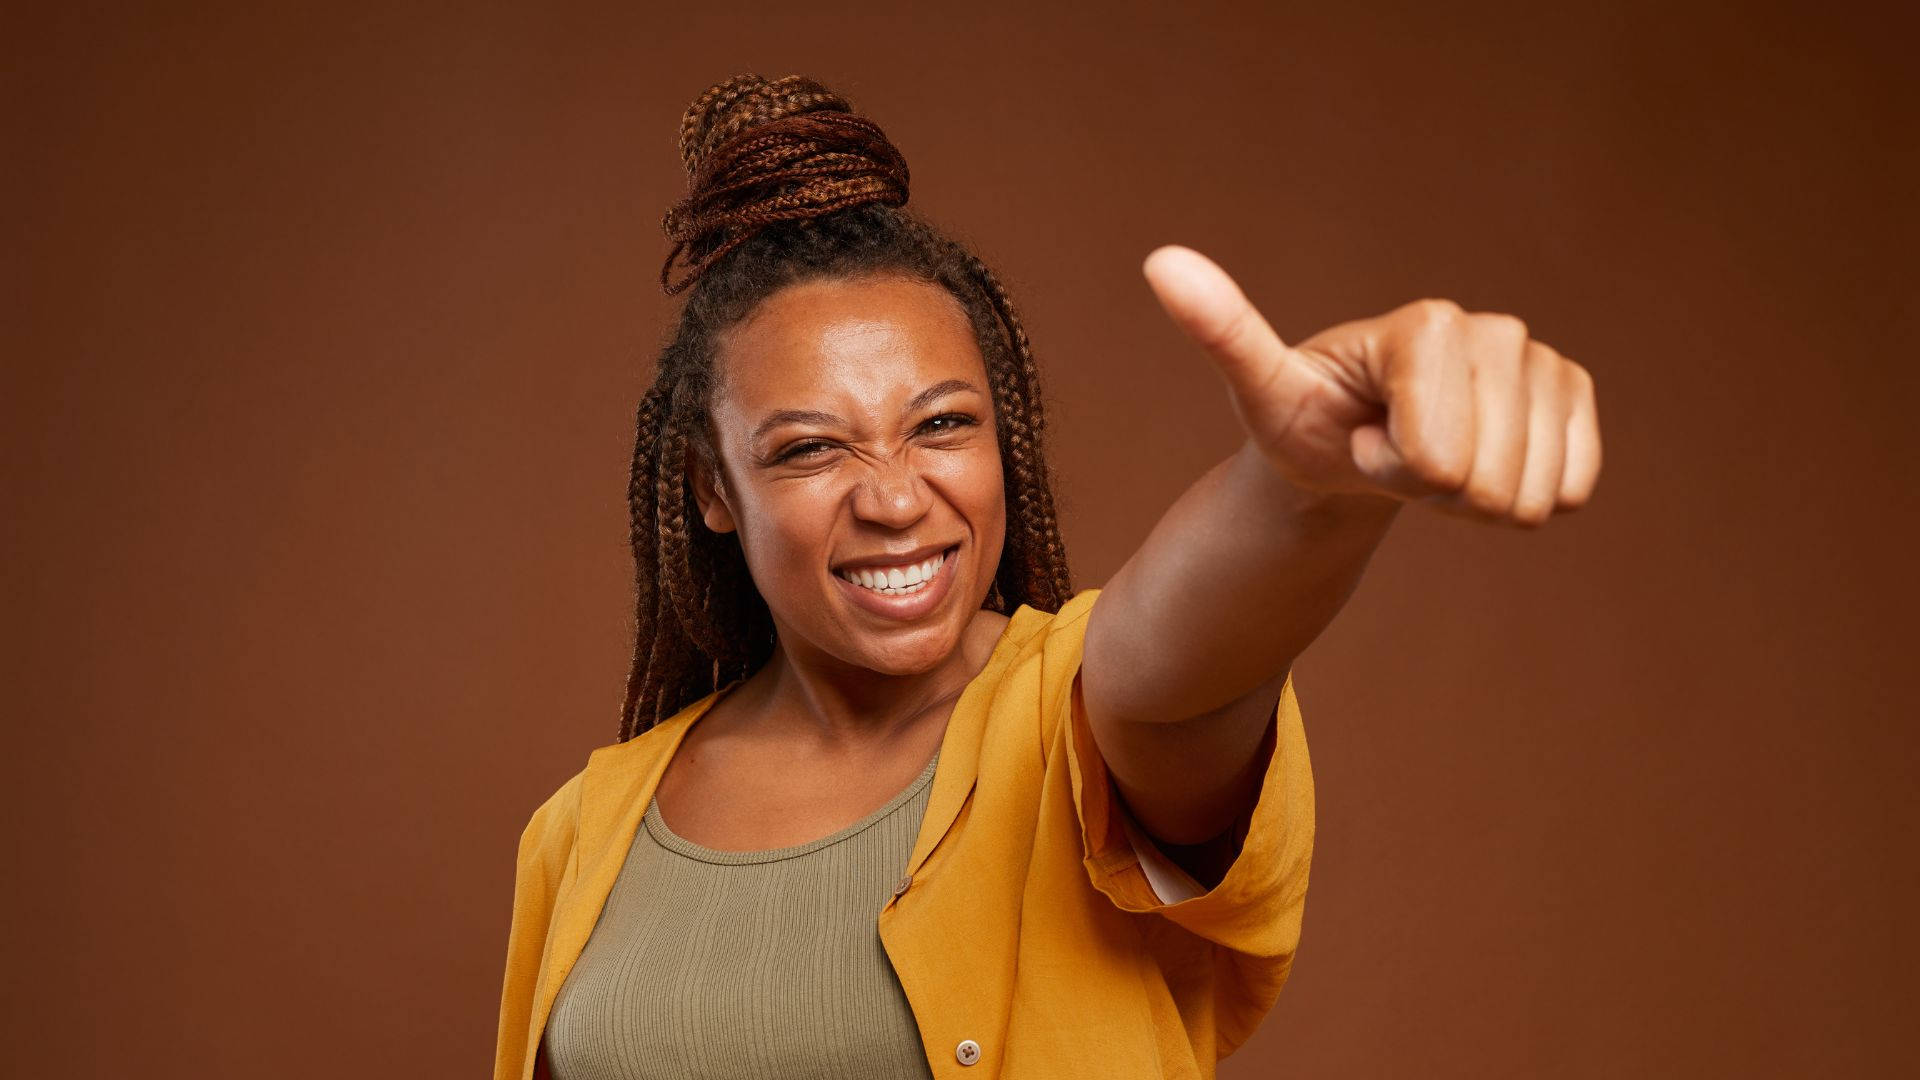 Empowered African Woman Giving Thumbs Up Wallpaper